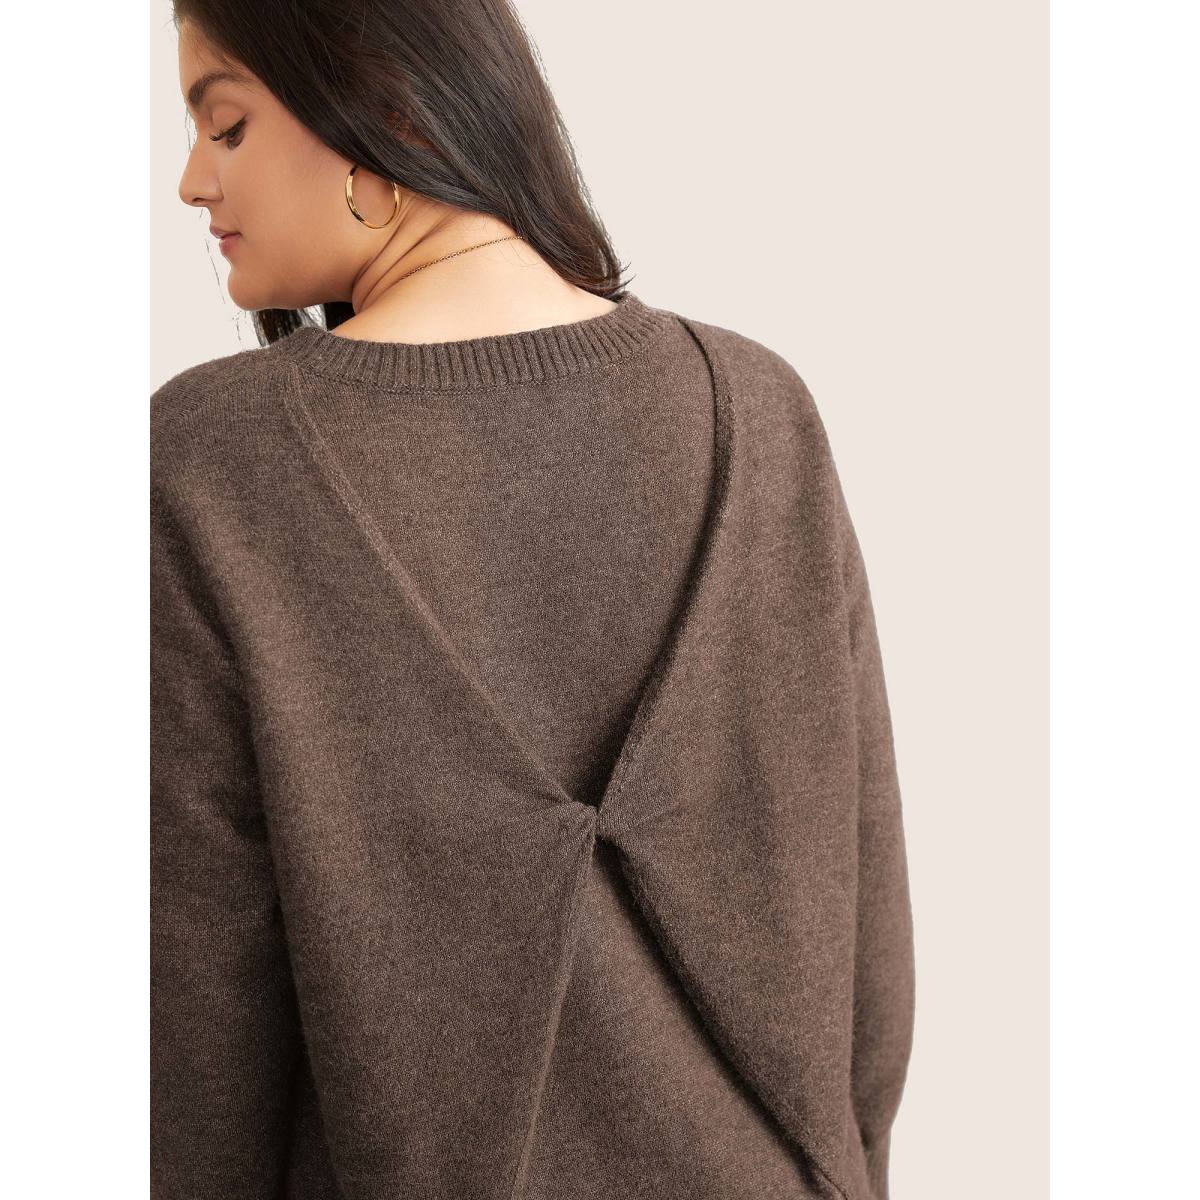 

Plus Size Supersoft Essentials Solid Heather Twist Back Pullover DarkBrown Women Casual Long Sleeve Round Neck Everyday Pullovers BloomChic